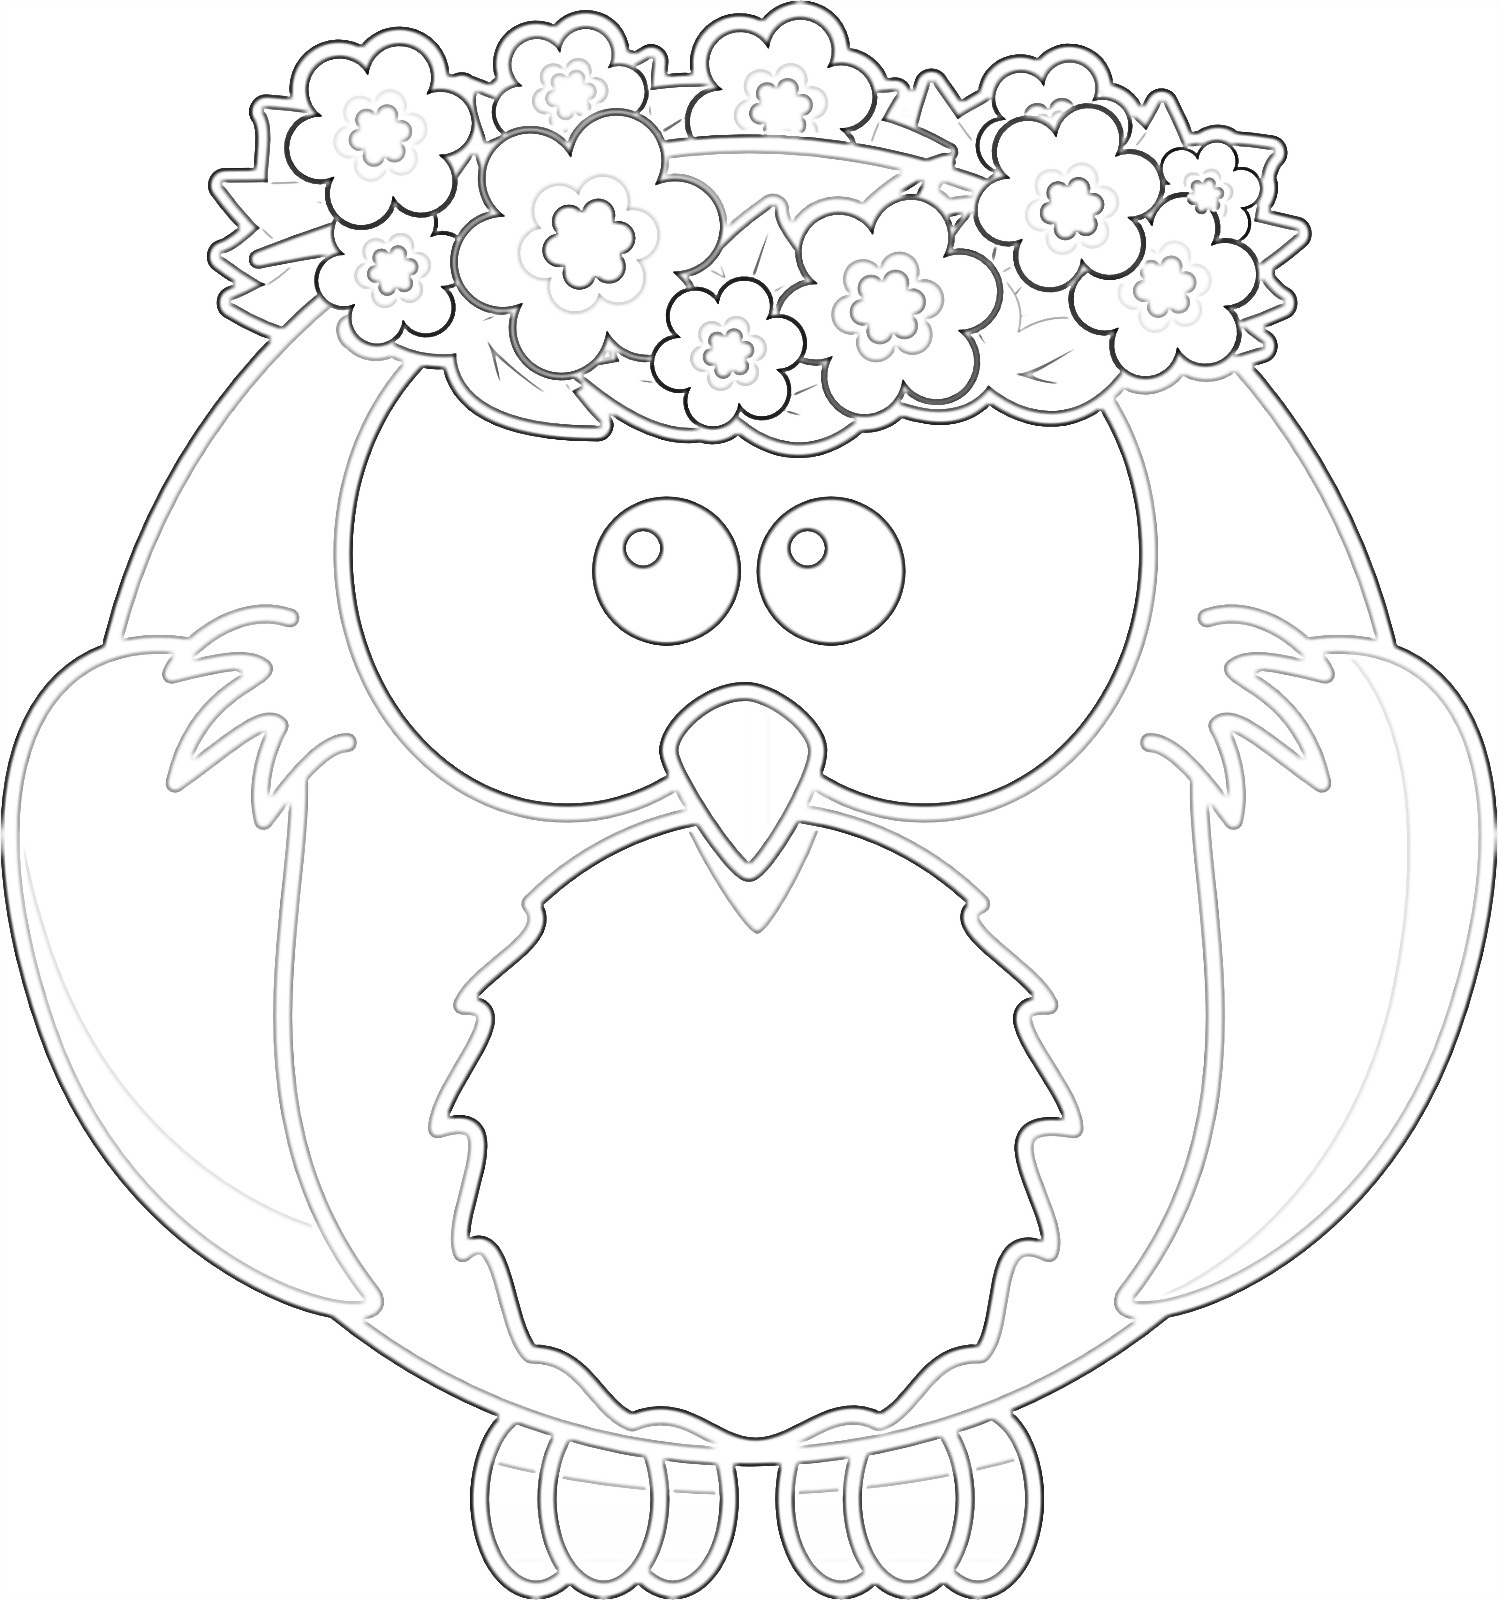 Owl With Flowers - Coloring page